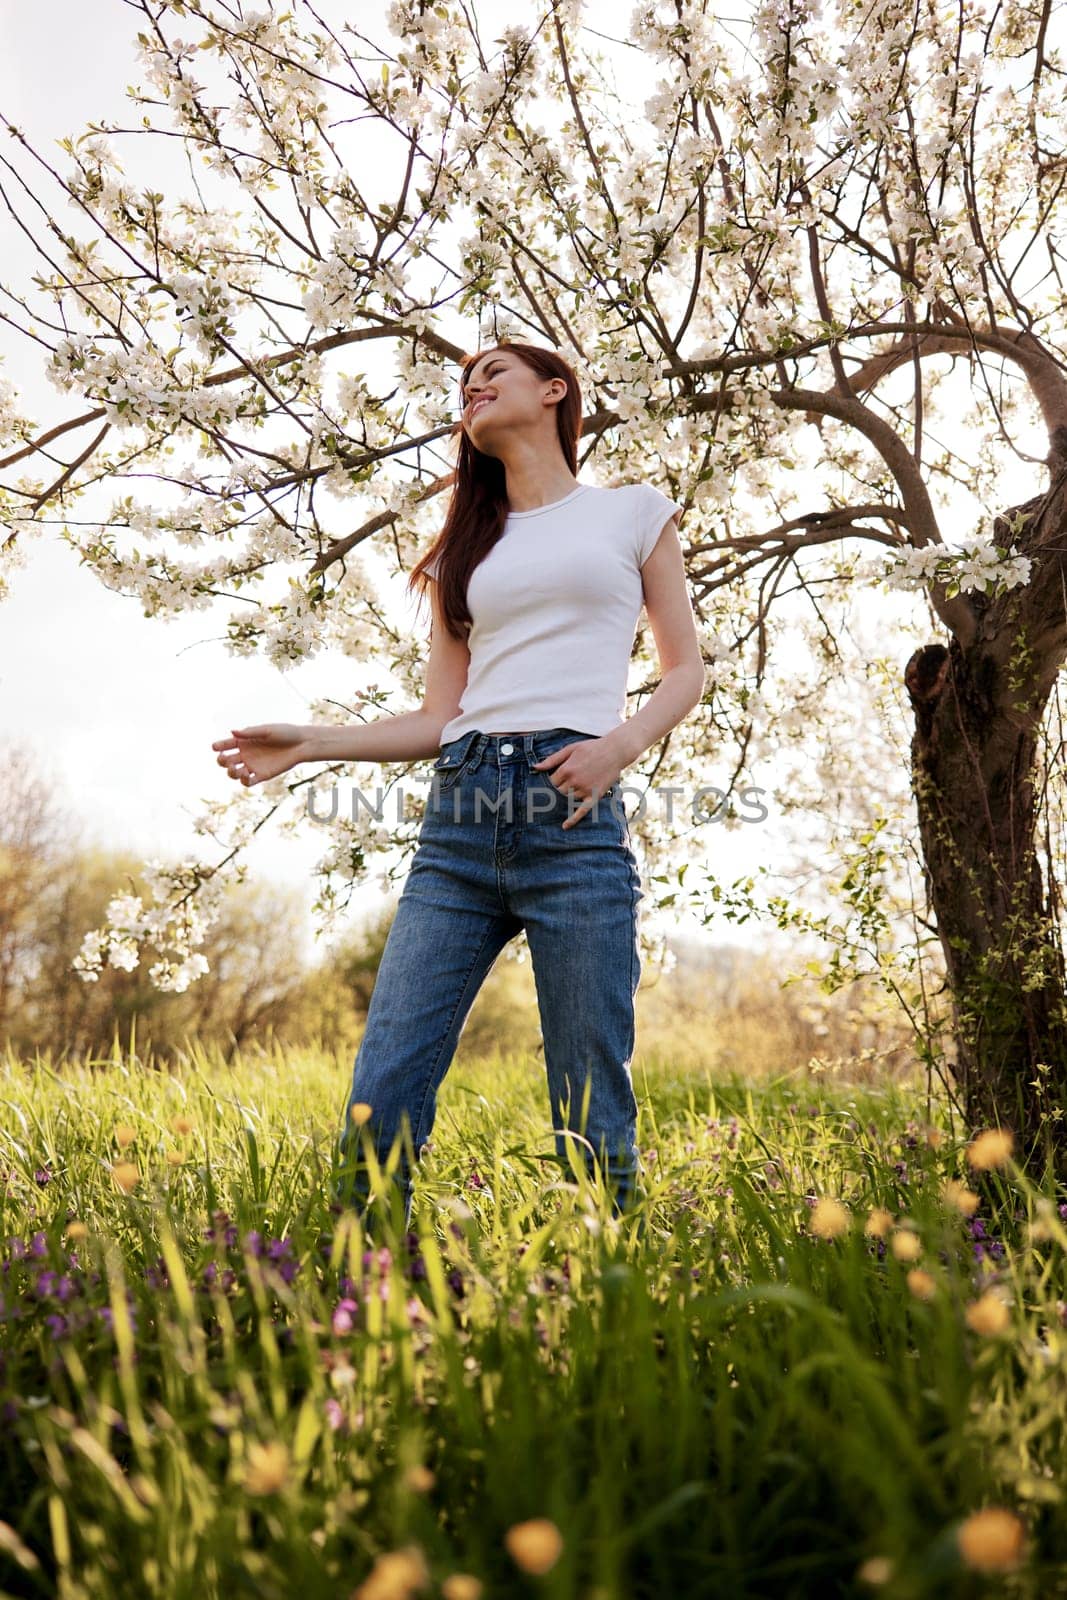 joyful, happy woman in jeans and a light T-shirt posing against the backdrop of a flowering tree by Vichizh